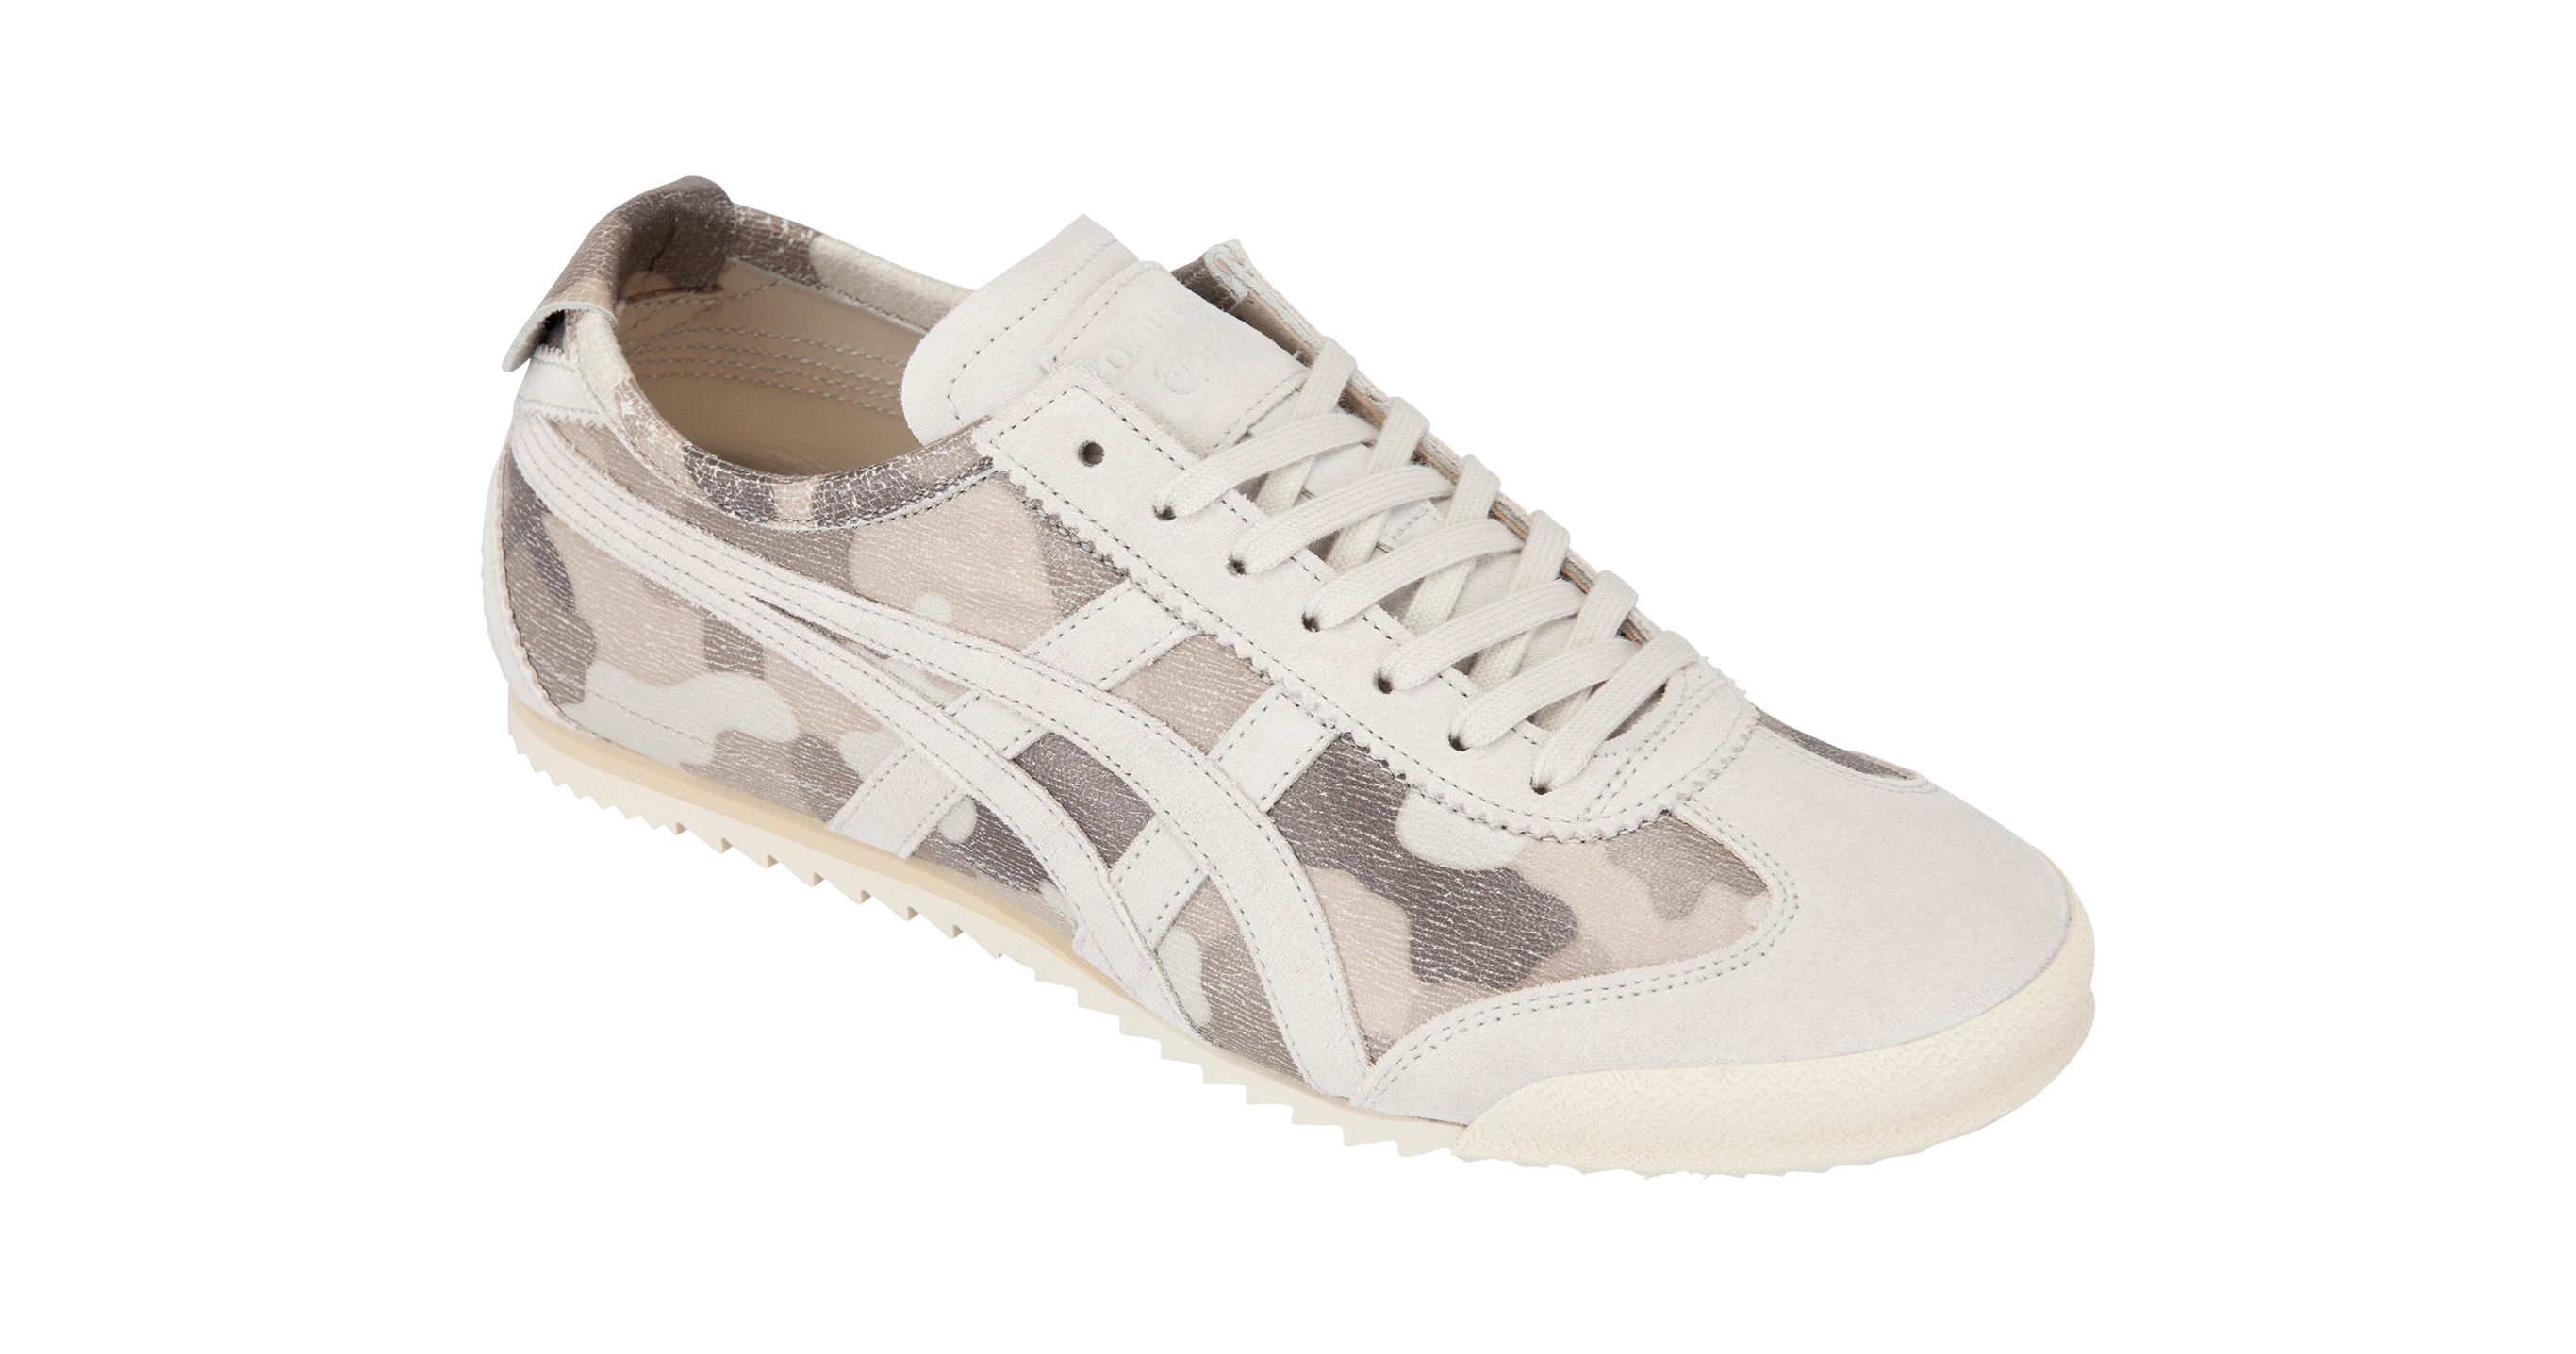  In August, Onitsuka Tiger will be releasing “MEXICO SLIP-ON DELUXE” for their “NIPPON MADE” series. The footwear has an elastic strap applied on its instep to provide a comfortable fit. The upper material of the sneaker is leather made in Japan. The sneaker comes in camouflage pattern. WHITE/WHITE 25,920 Yen (Tax Included)
